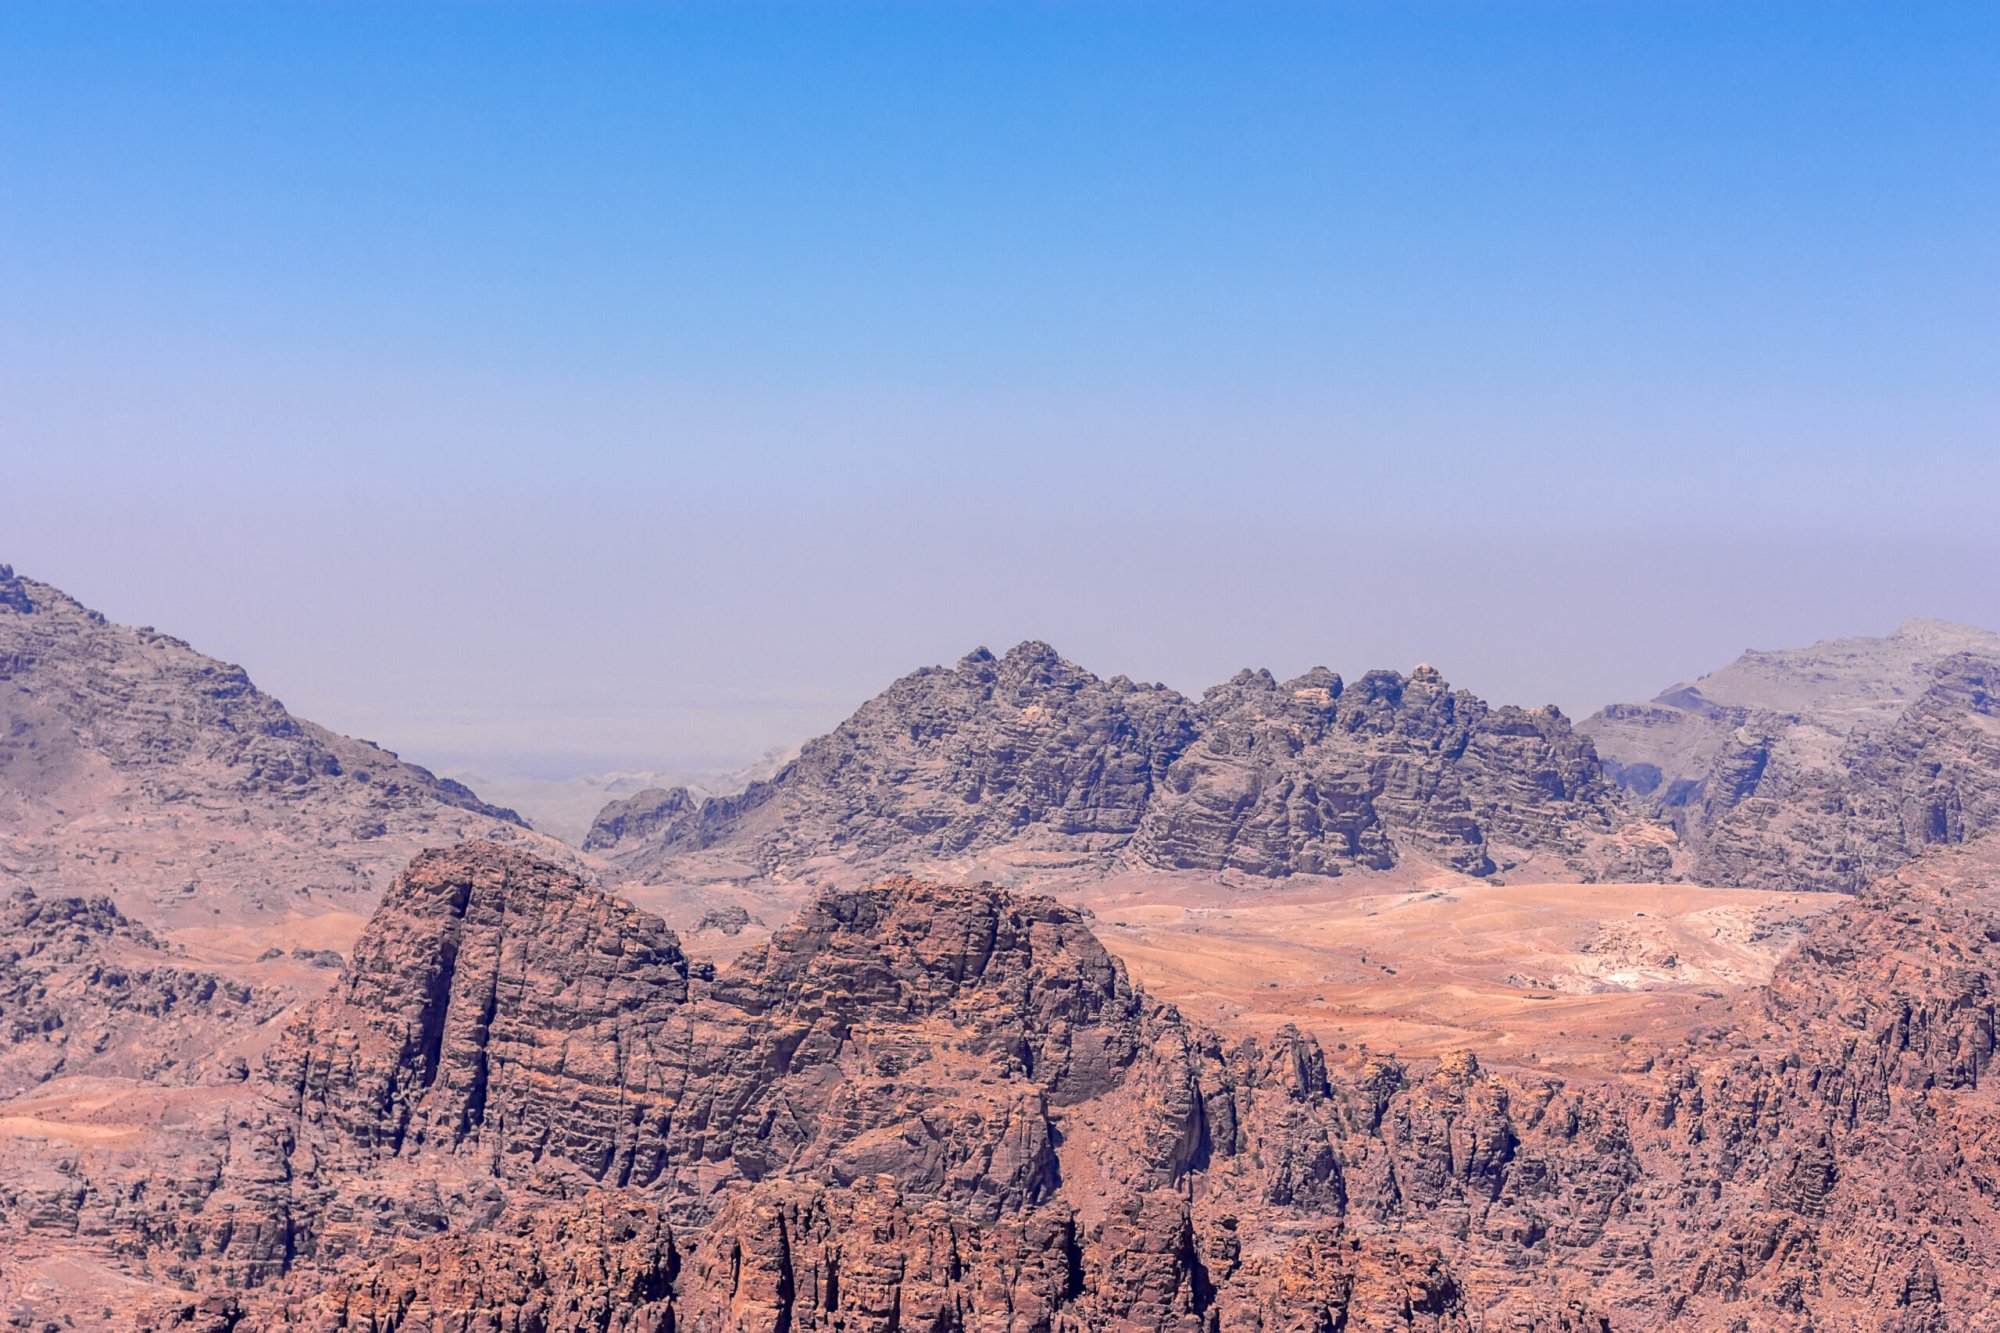 A view of the mountains in wadi rum, jordan.